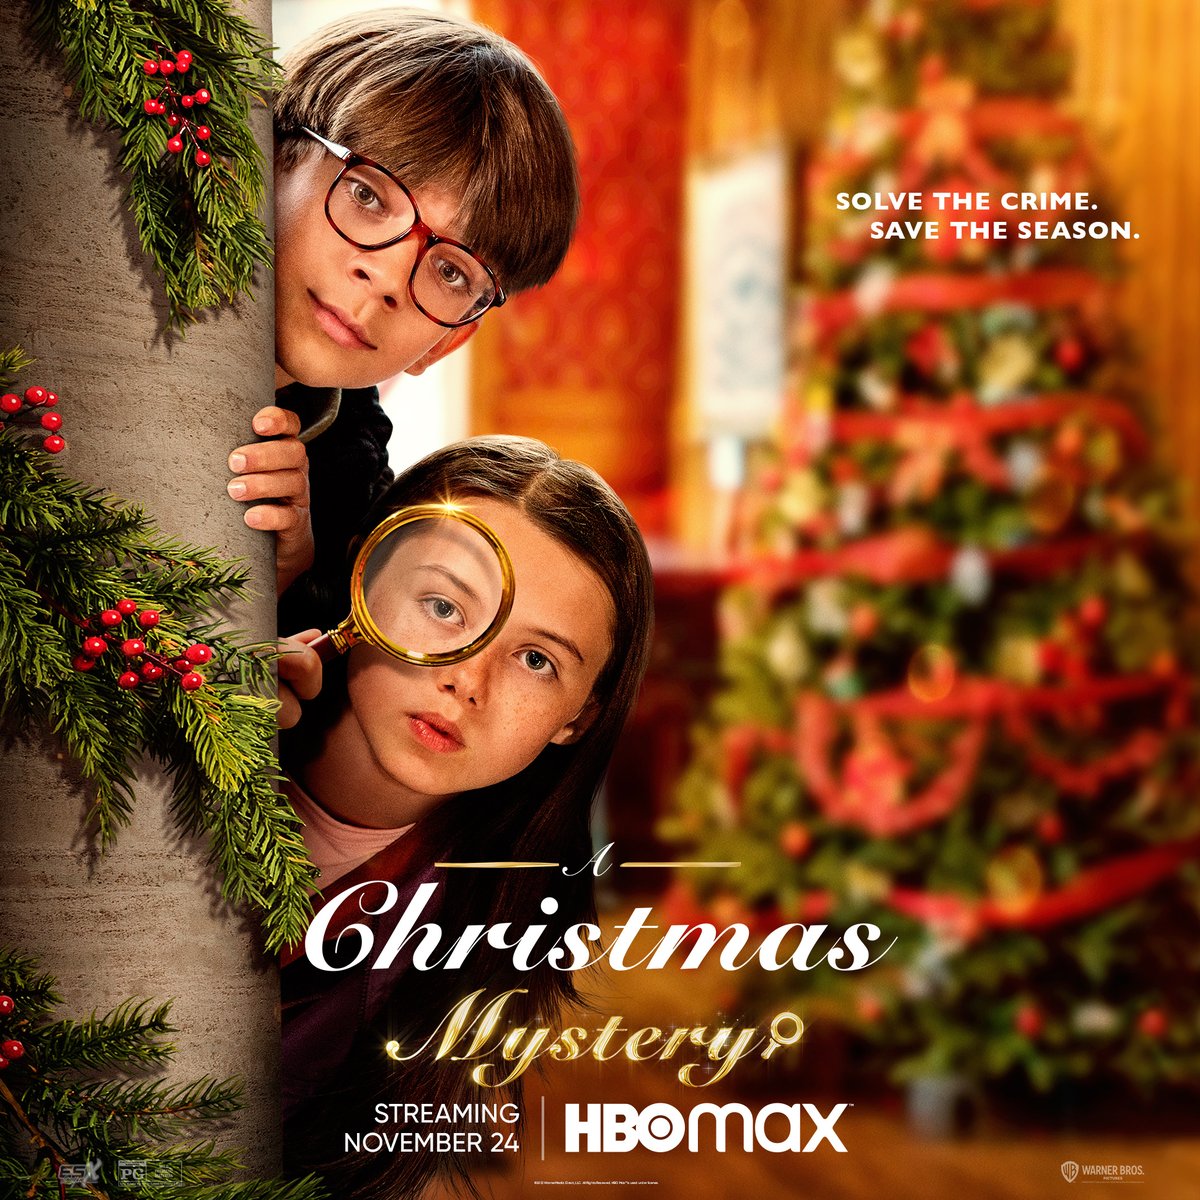 Spend the #HolidaysWithHBOMax! Watch the trailers for #HolidayHarmony, #AHollywoodChristmas & #AChristmasMystery now. 🎄hbomax.com/collections/ho…